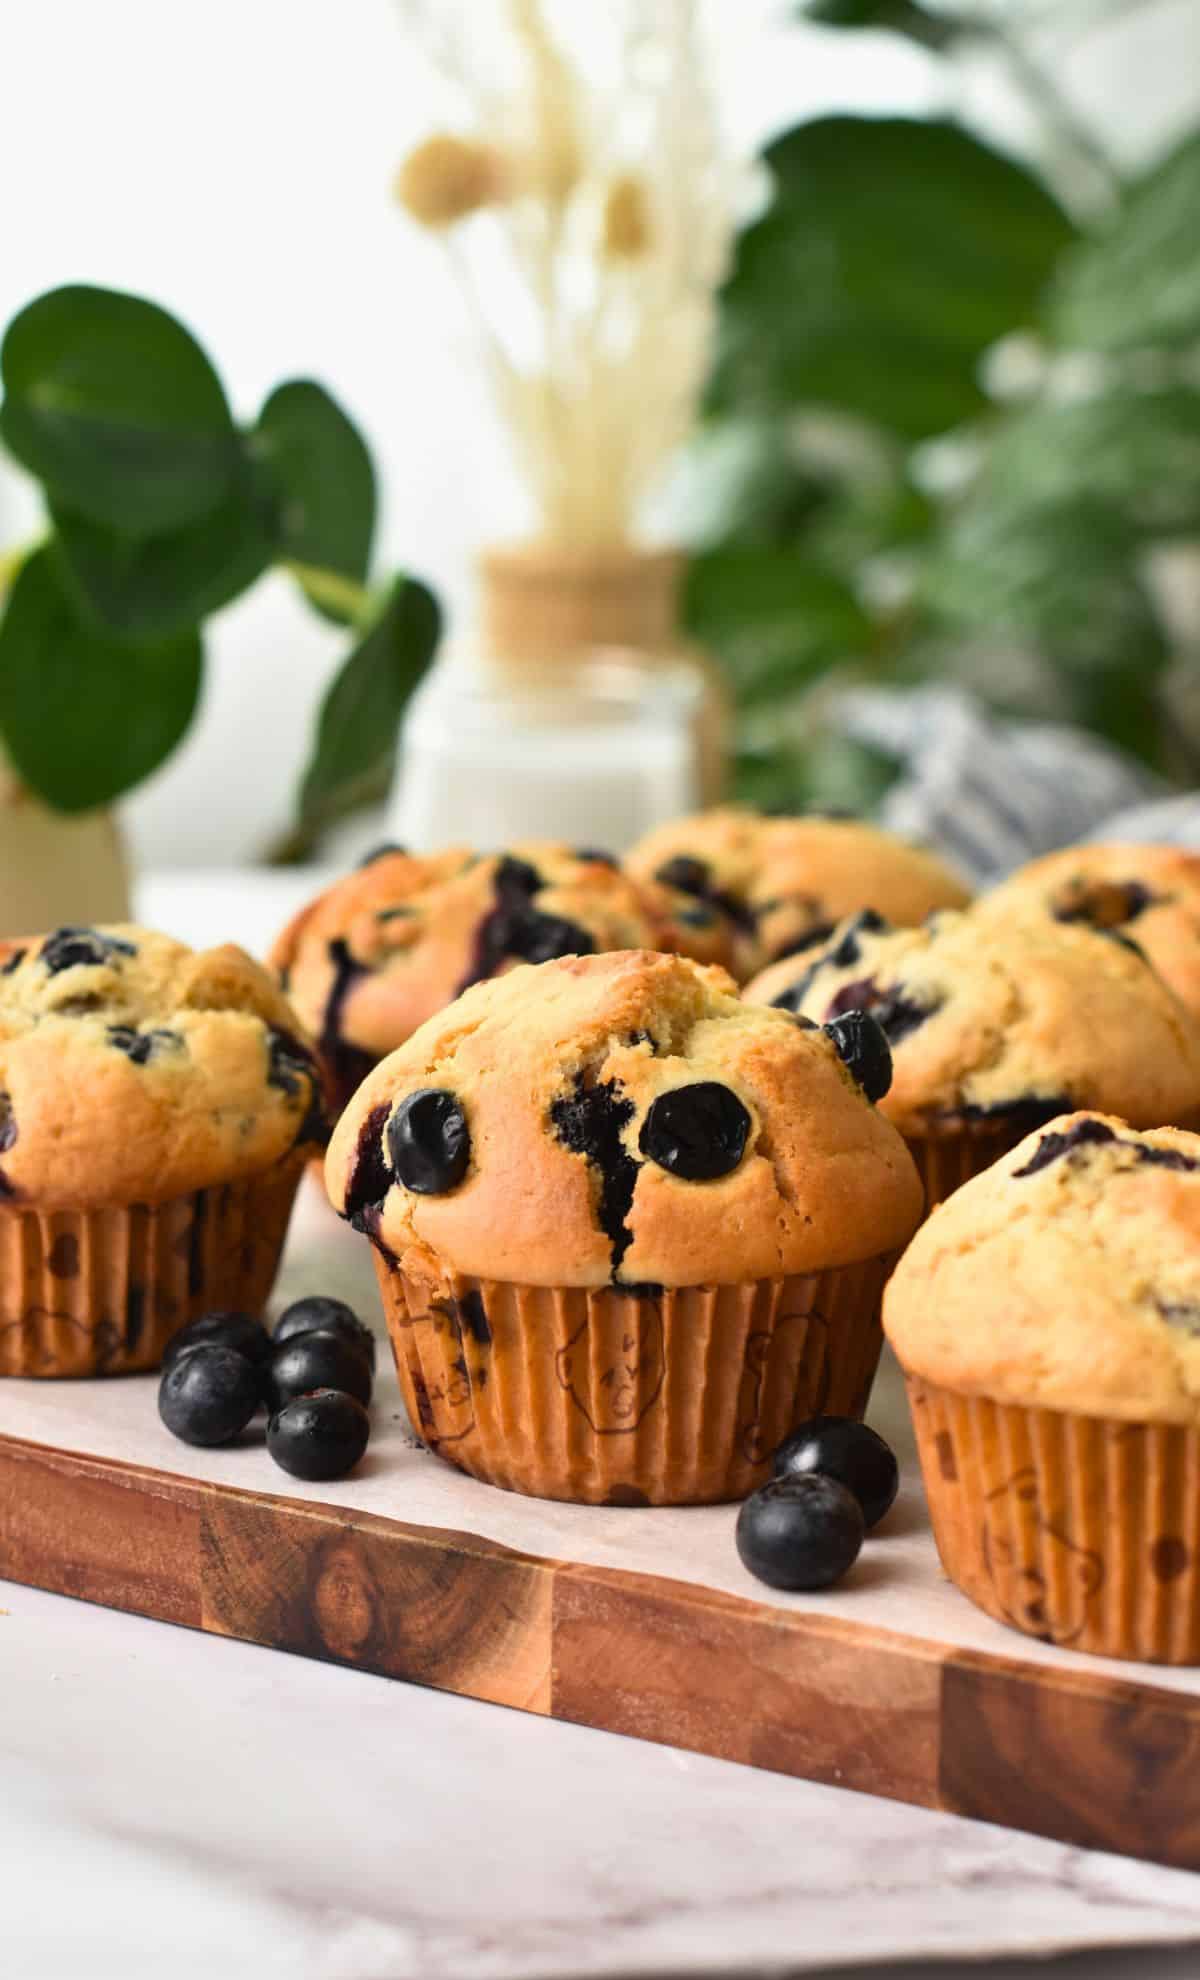 Vegan Blueberry Muffins on a wooden board.